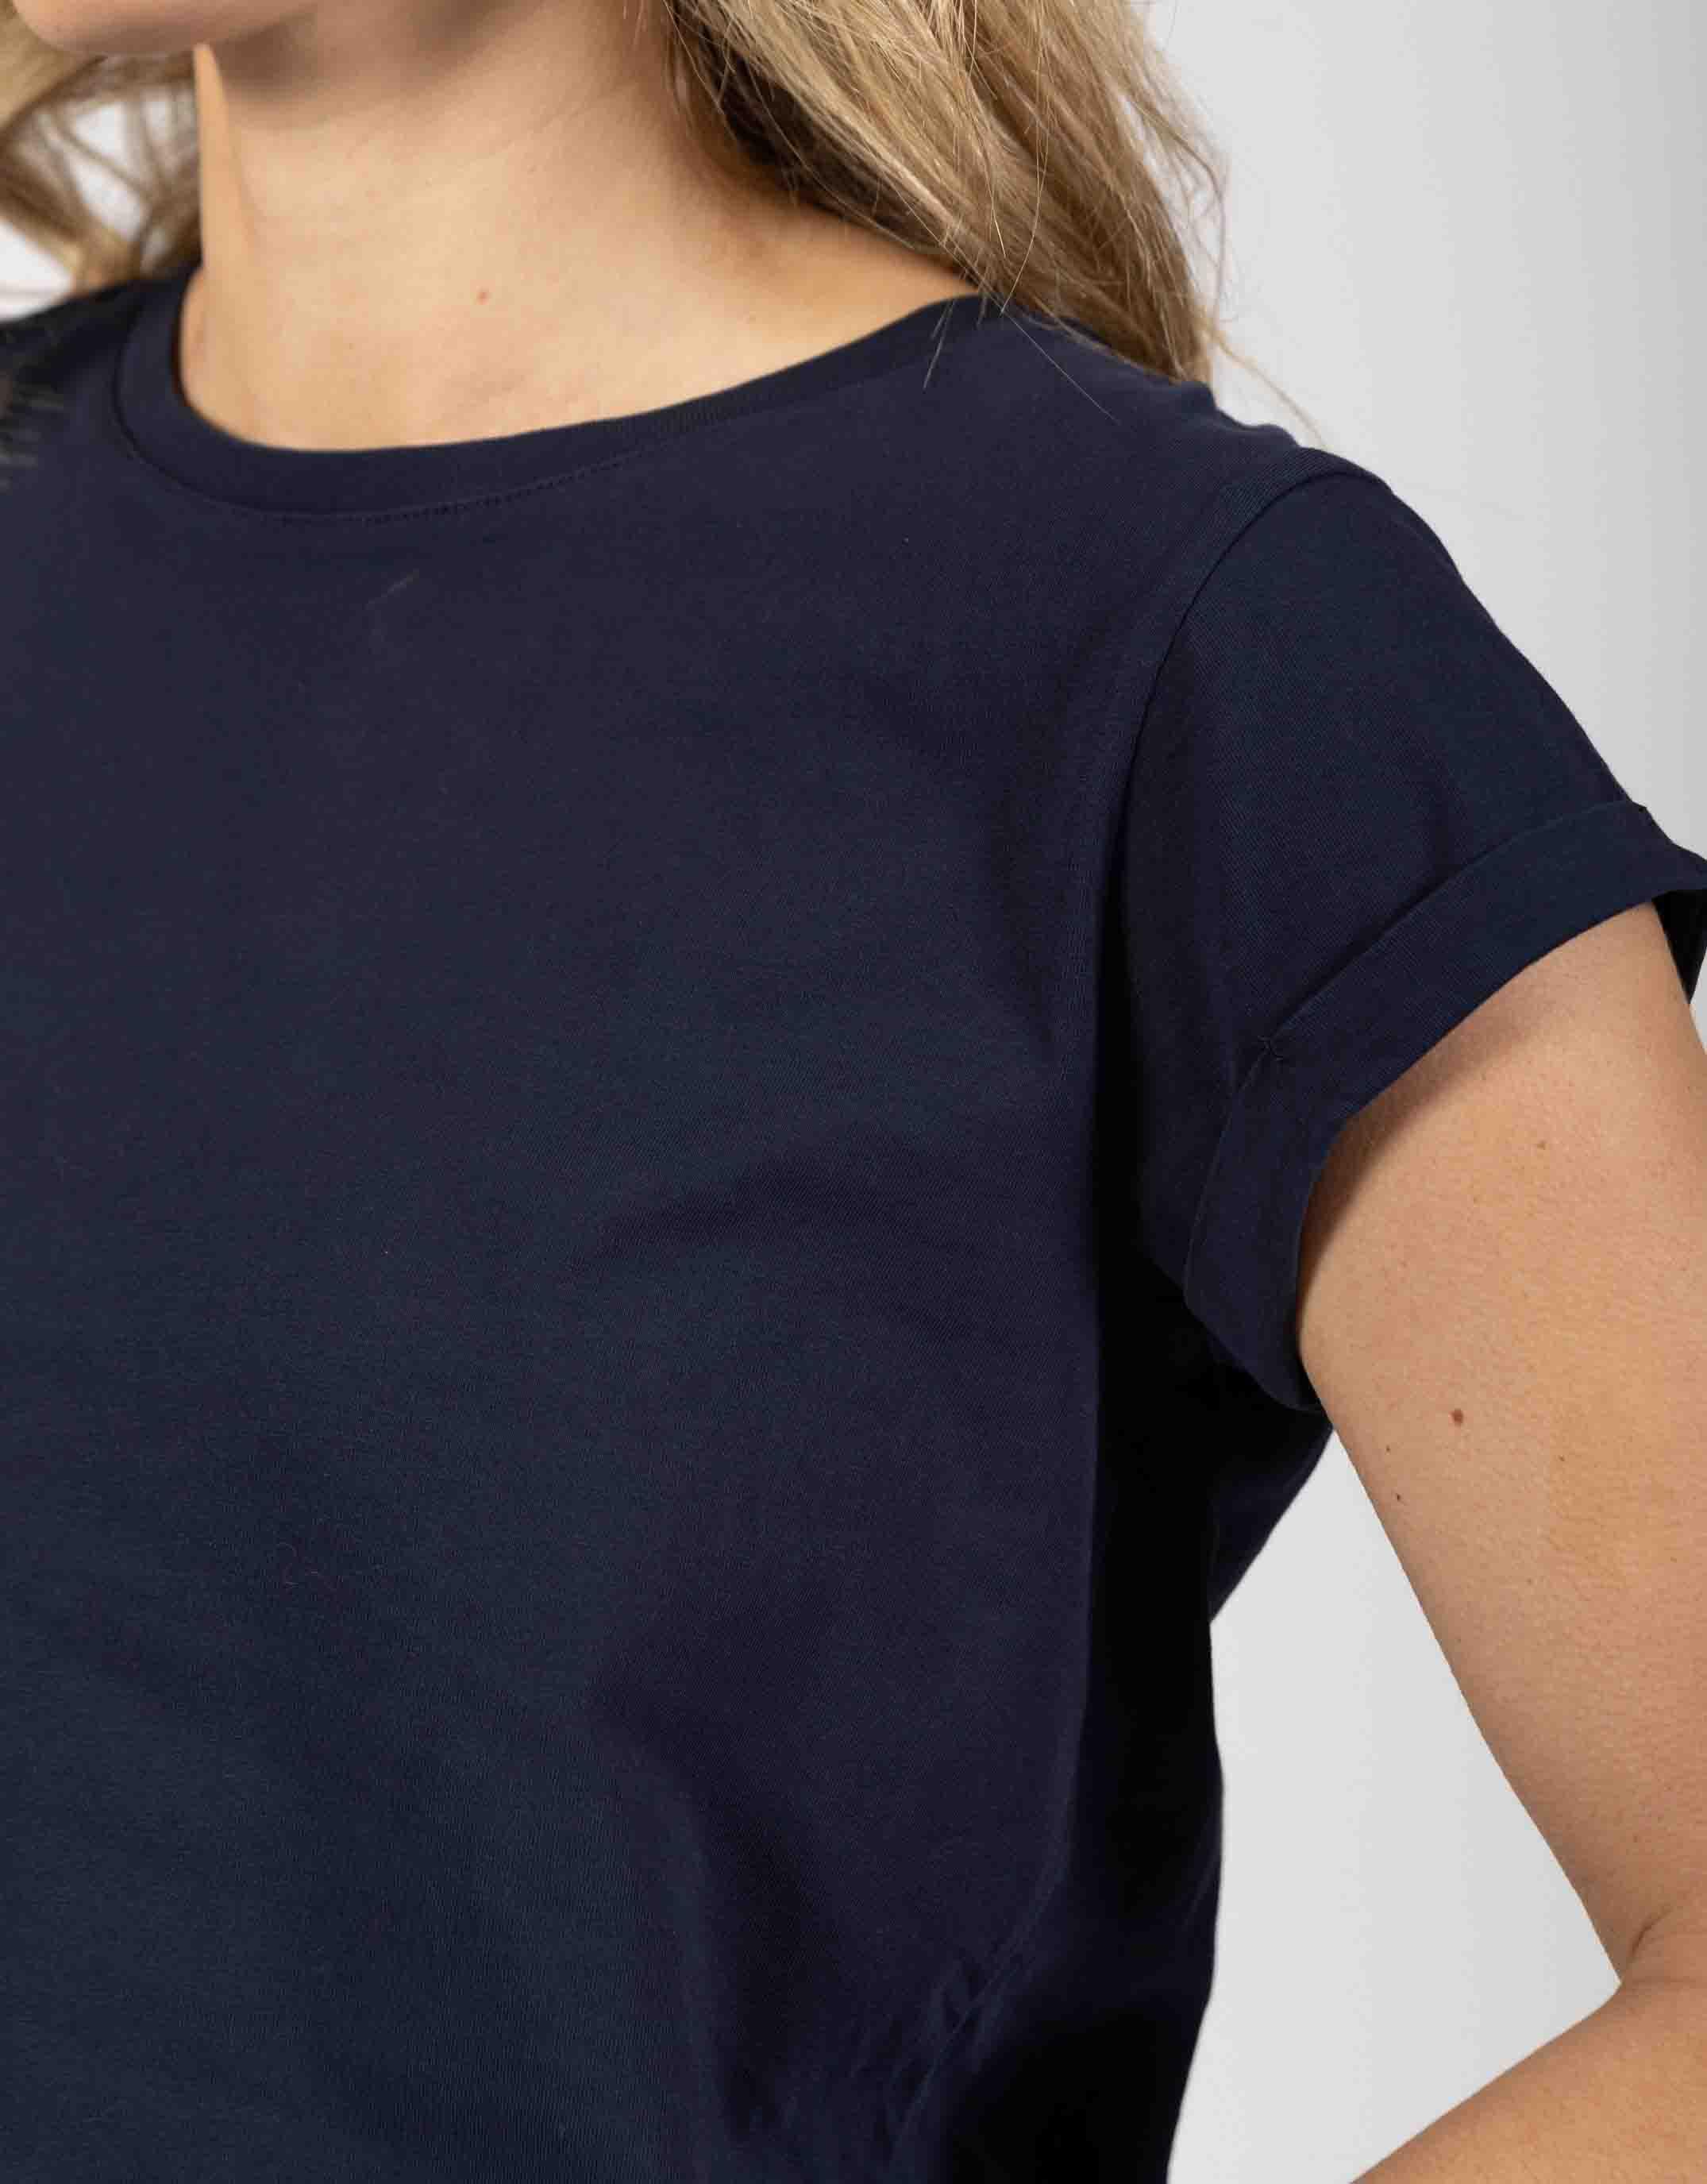 Buy Manly Tee - Navy Foxwood for Sale Online Australia | White & Co.